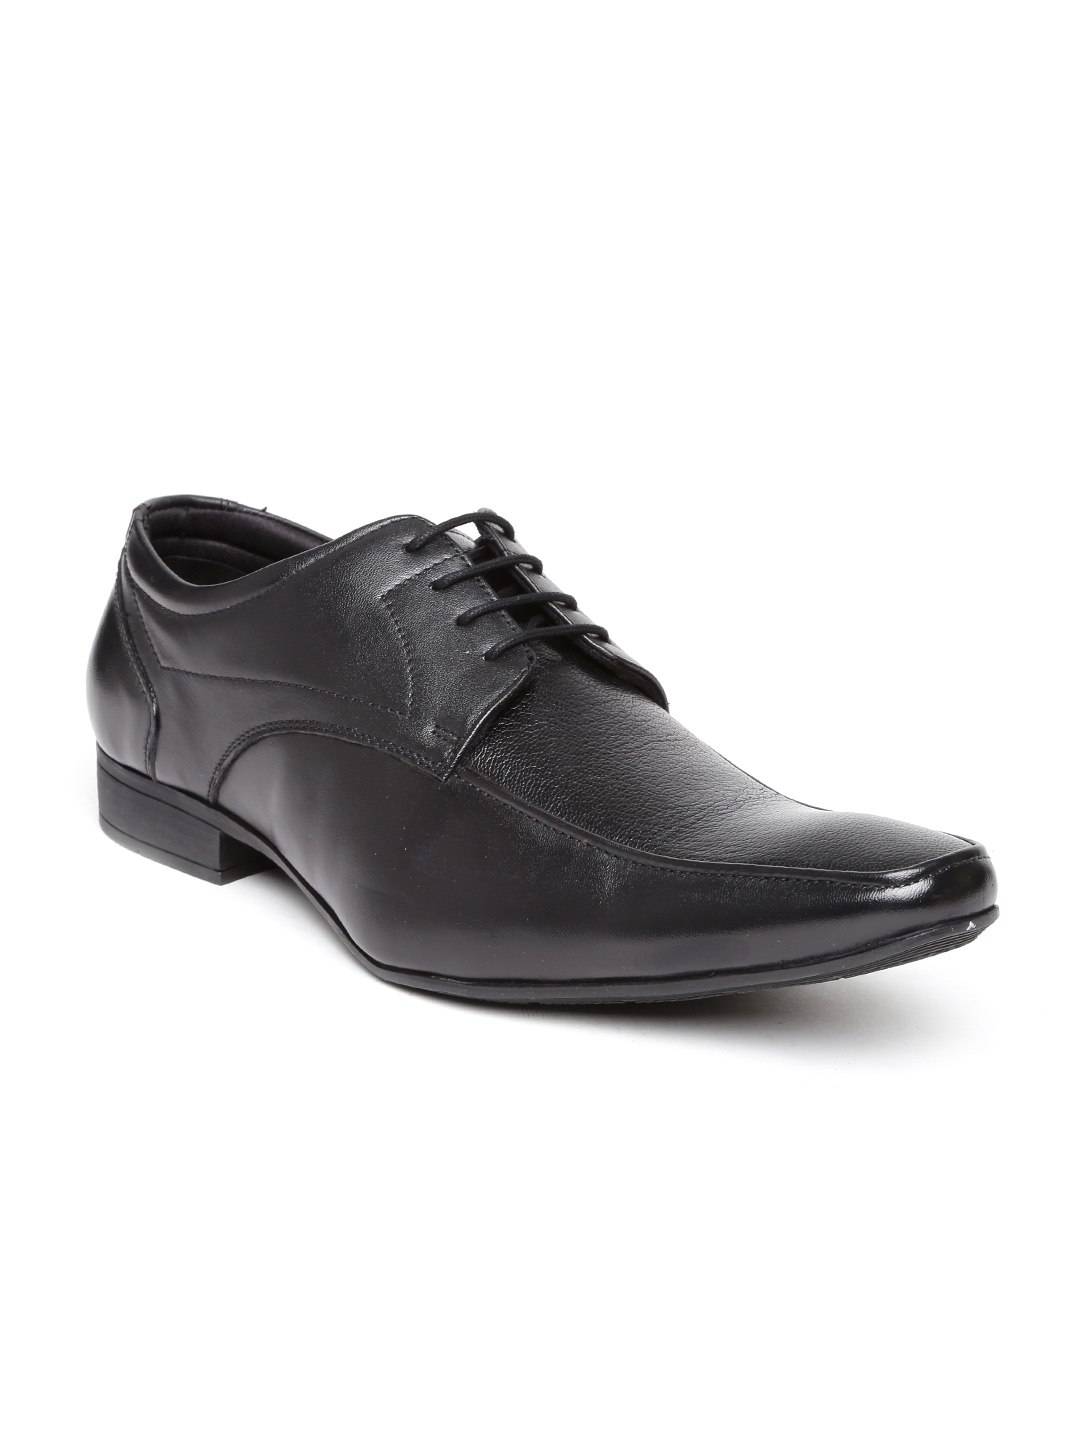 Buy Hush Puppies By Bata Men Black Leather Formal Shoes - Formal Shoes ...